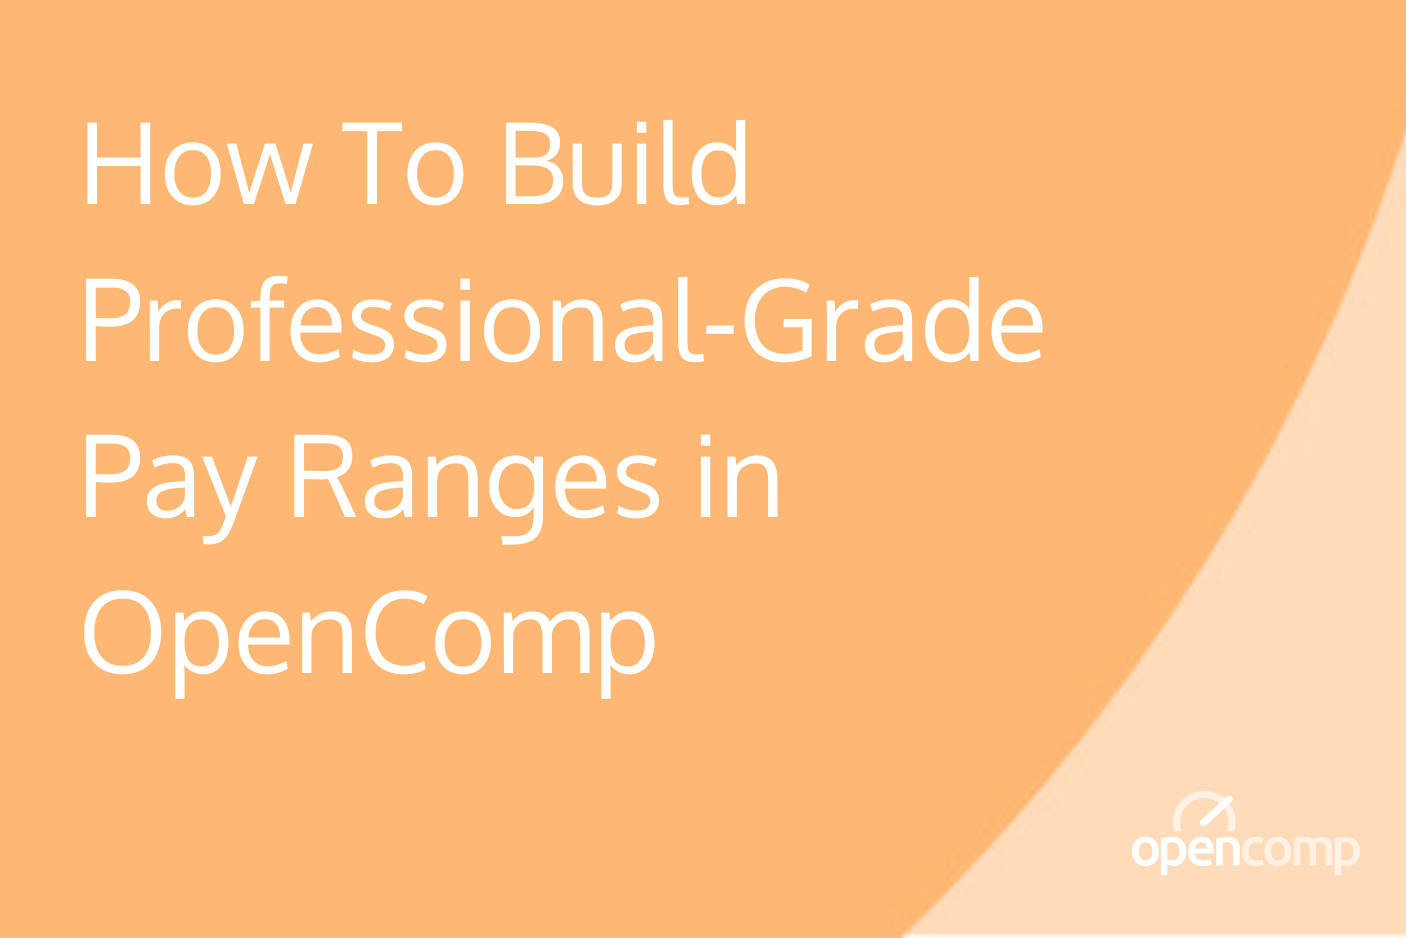 How To Build Professional-Grade Pay Ranges in OpenComp